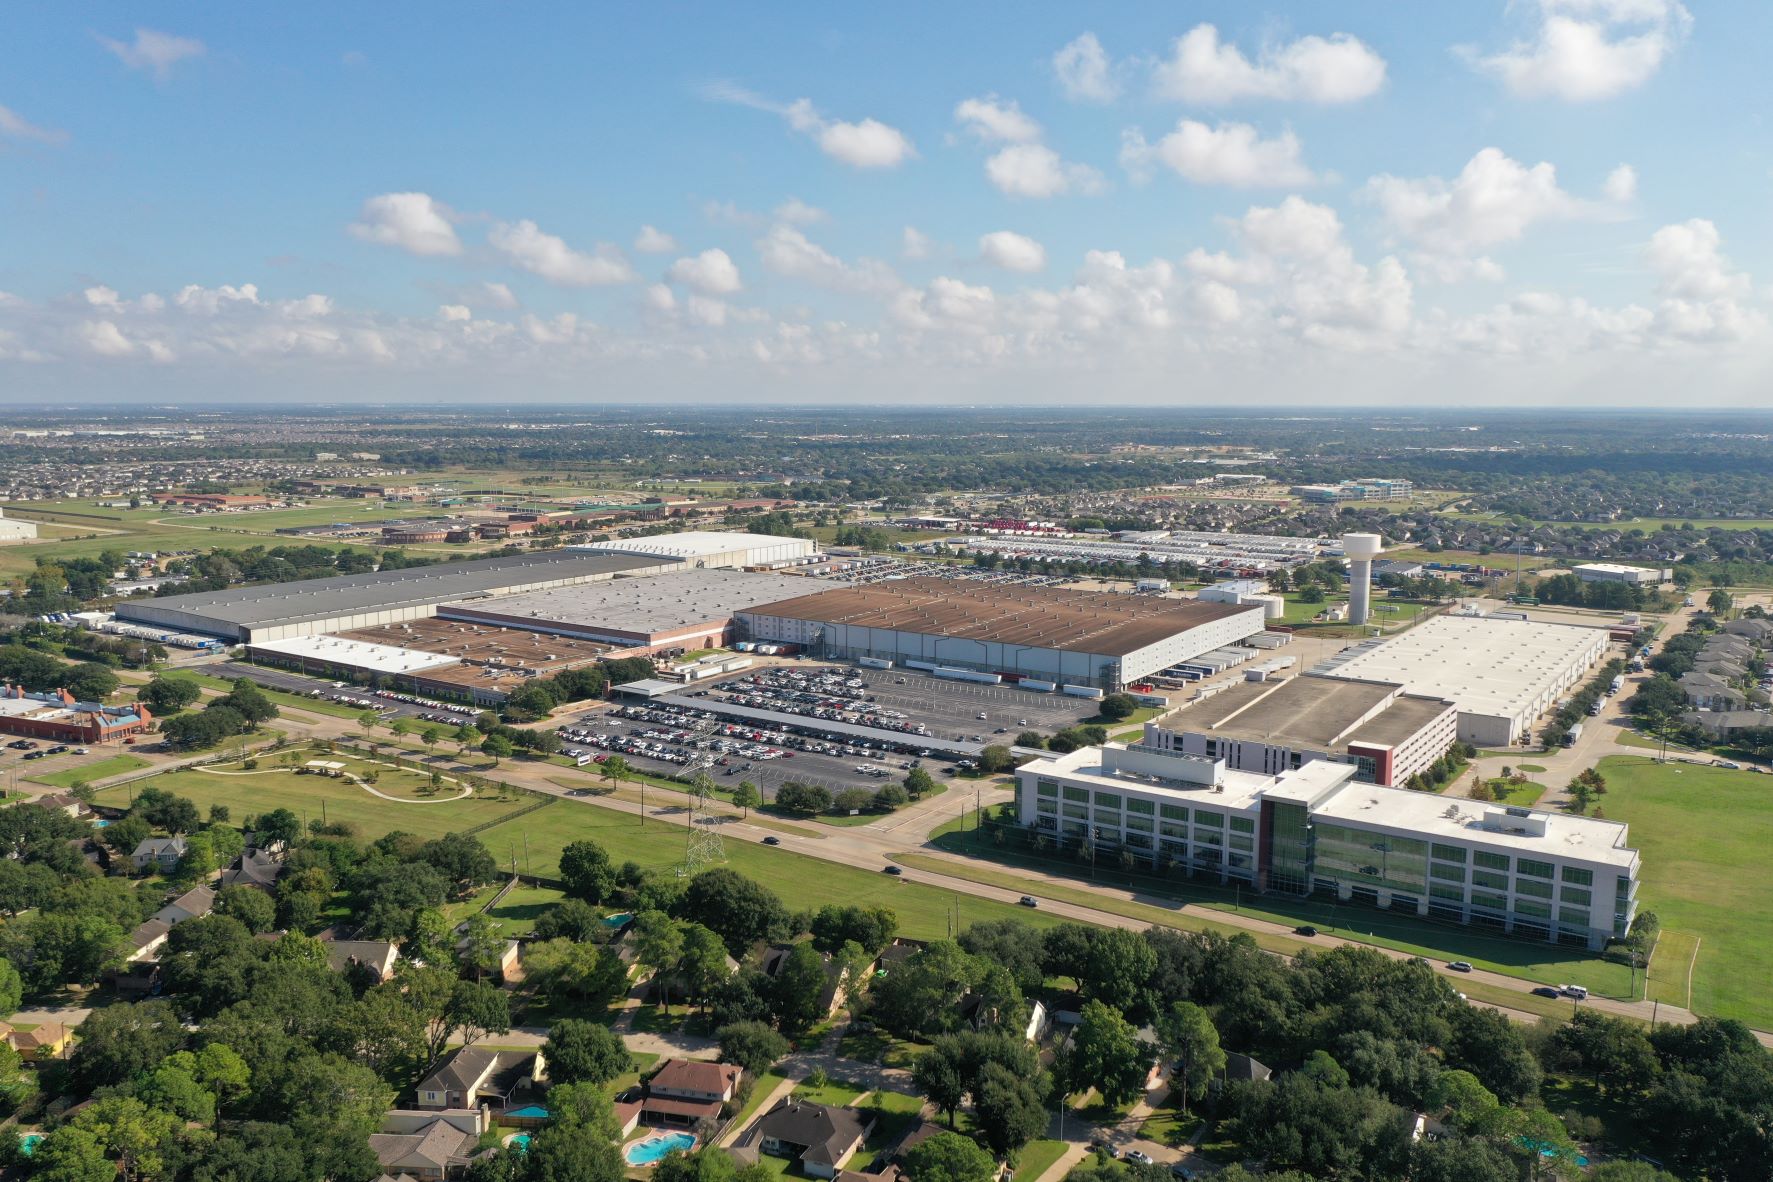 Academy Sporting activities + Outdoors headquarters in Katy sells for $190M